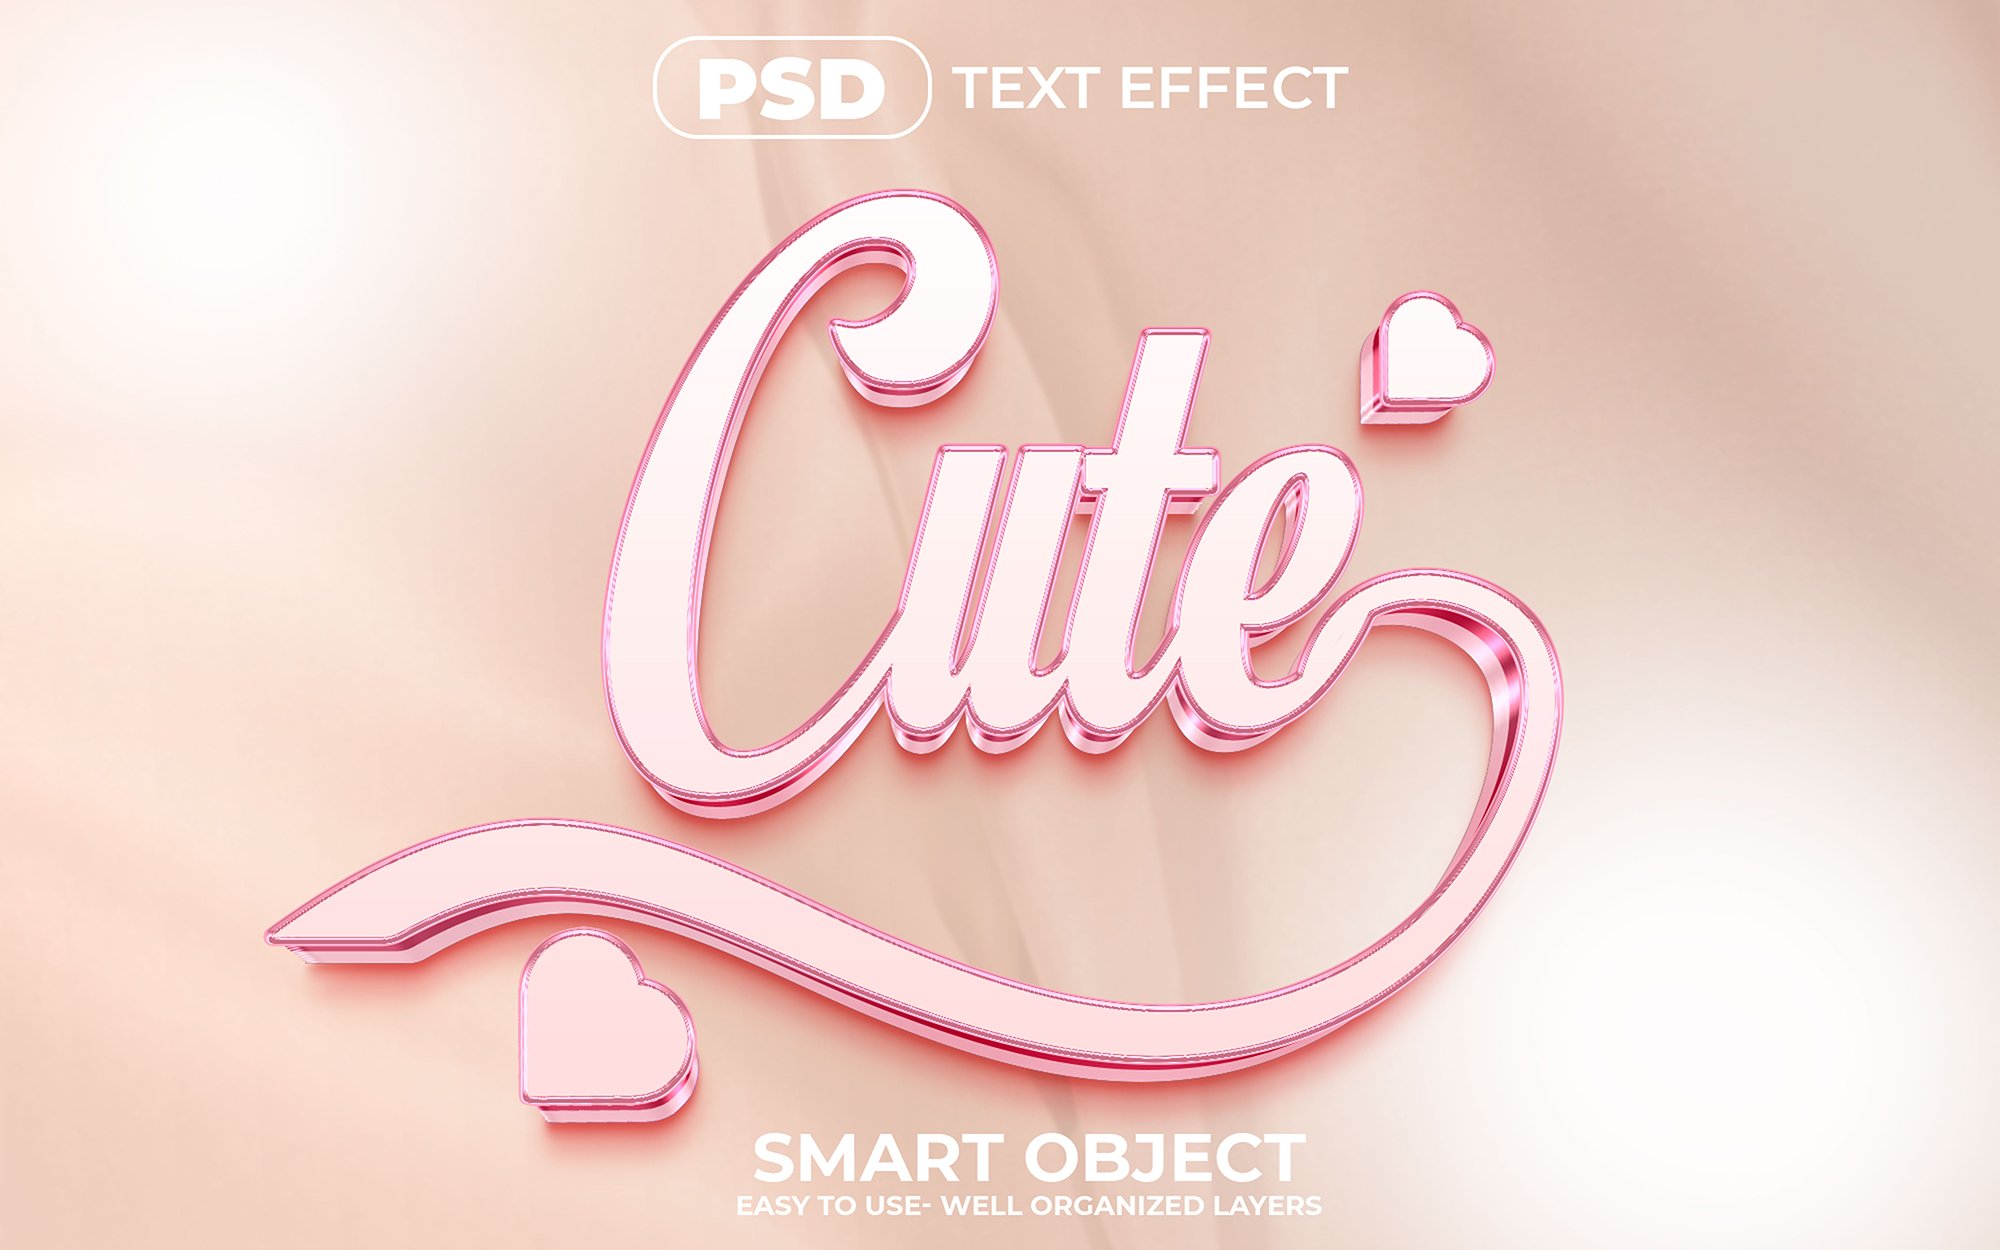 Cute 3d Editable Text Effect Stylecover image.